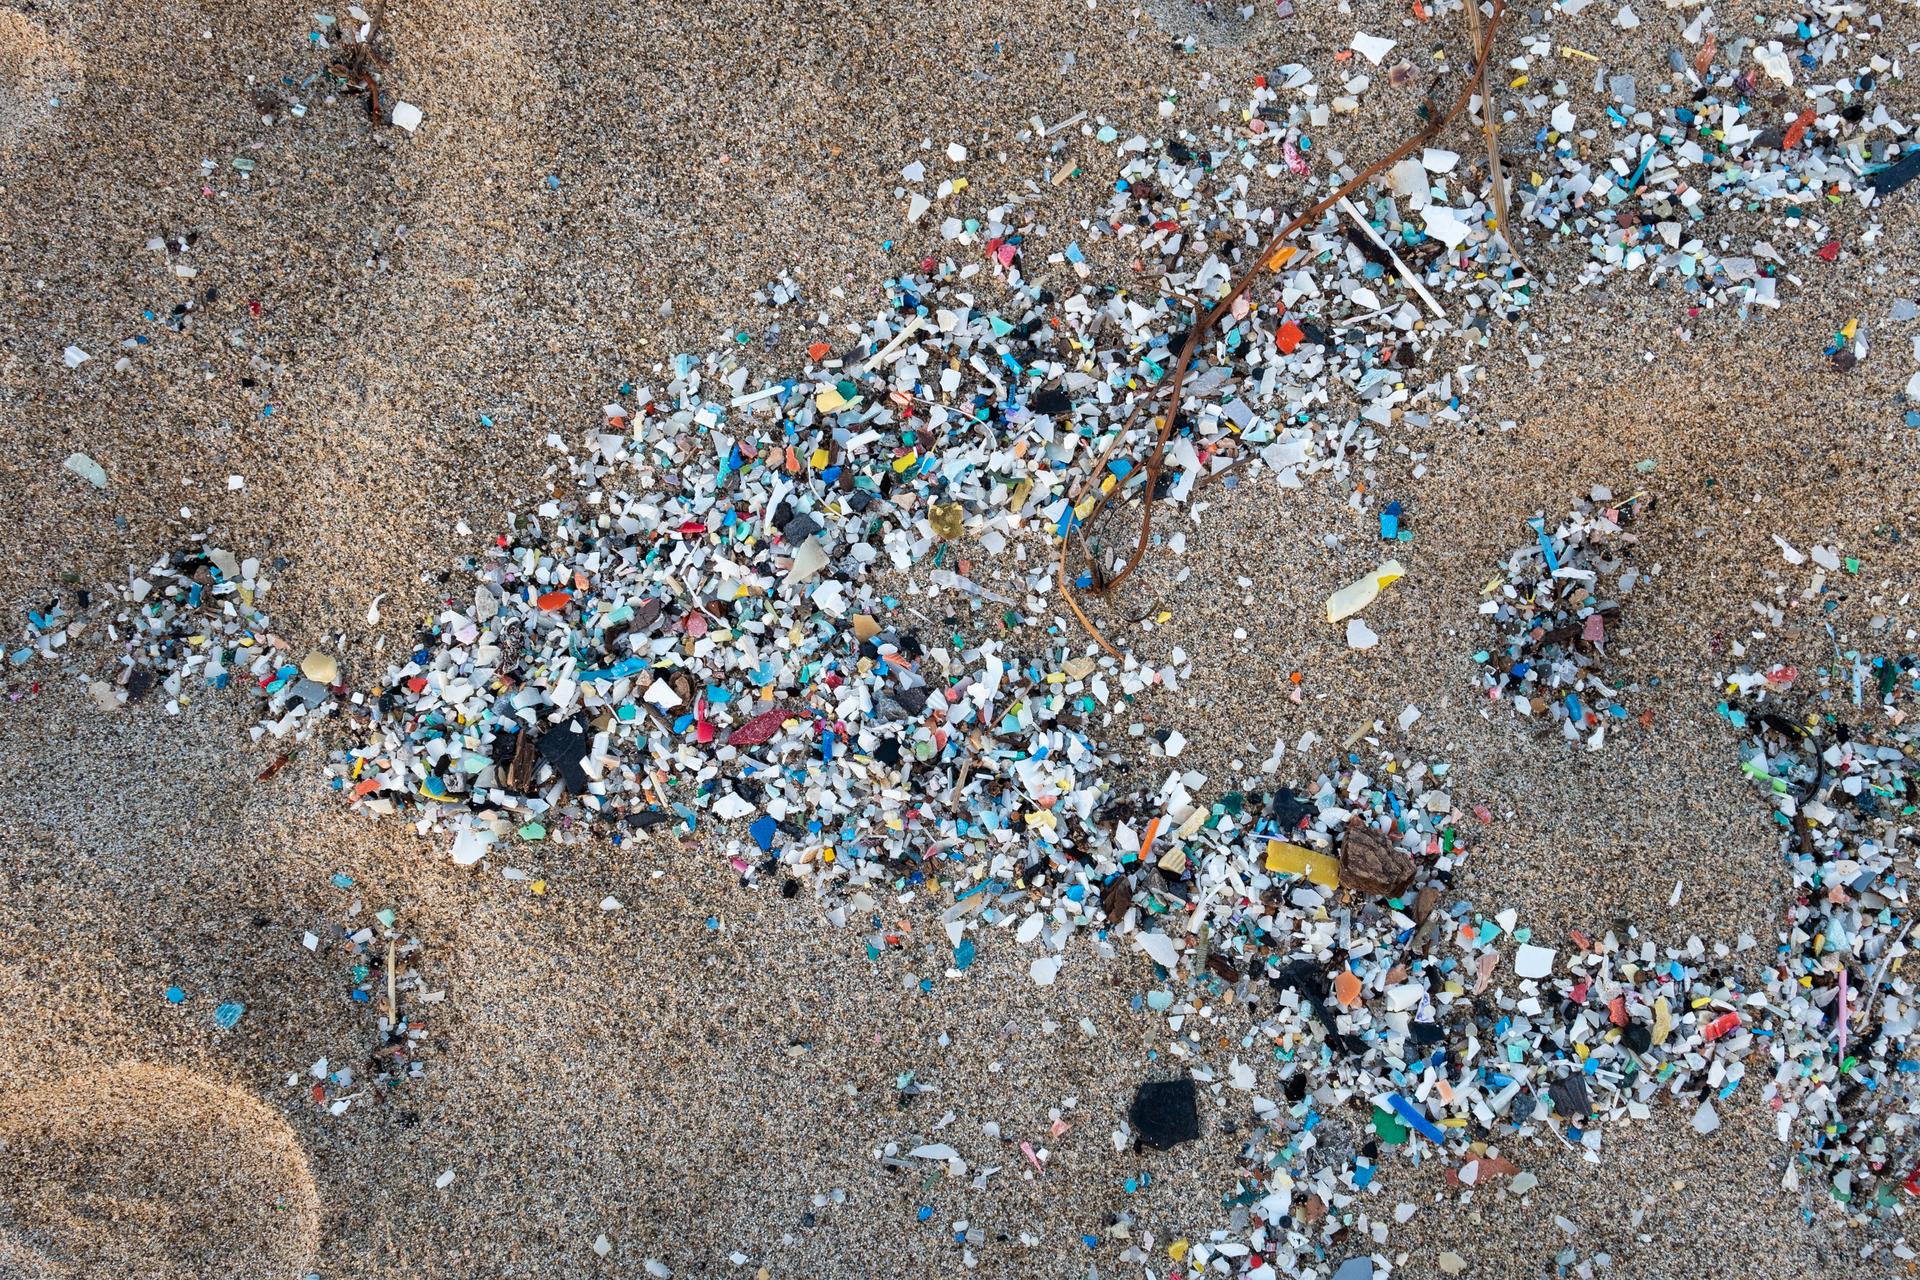 Plastic fragments washed onto Schiavonea beach in Calabria, Italy, in a 2019 storm.